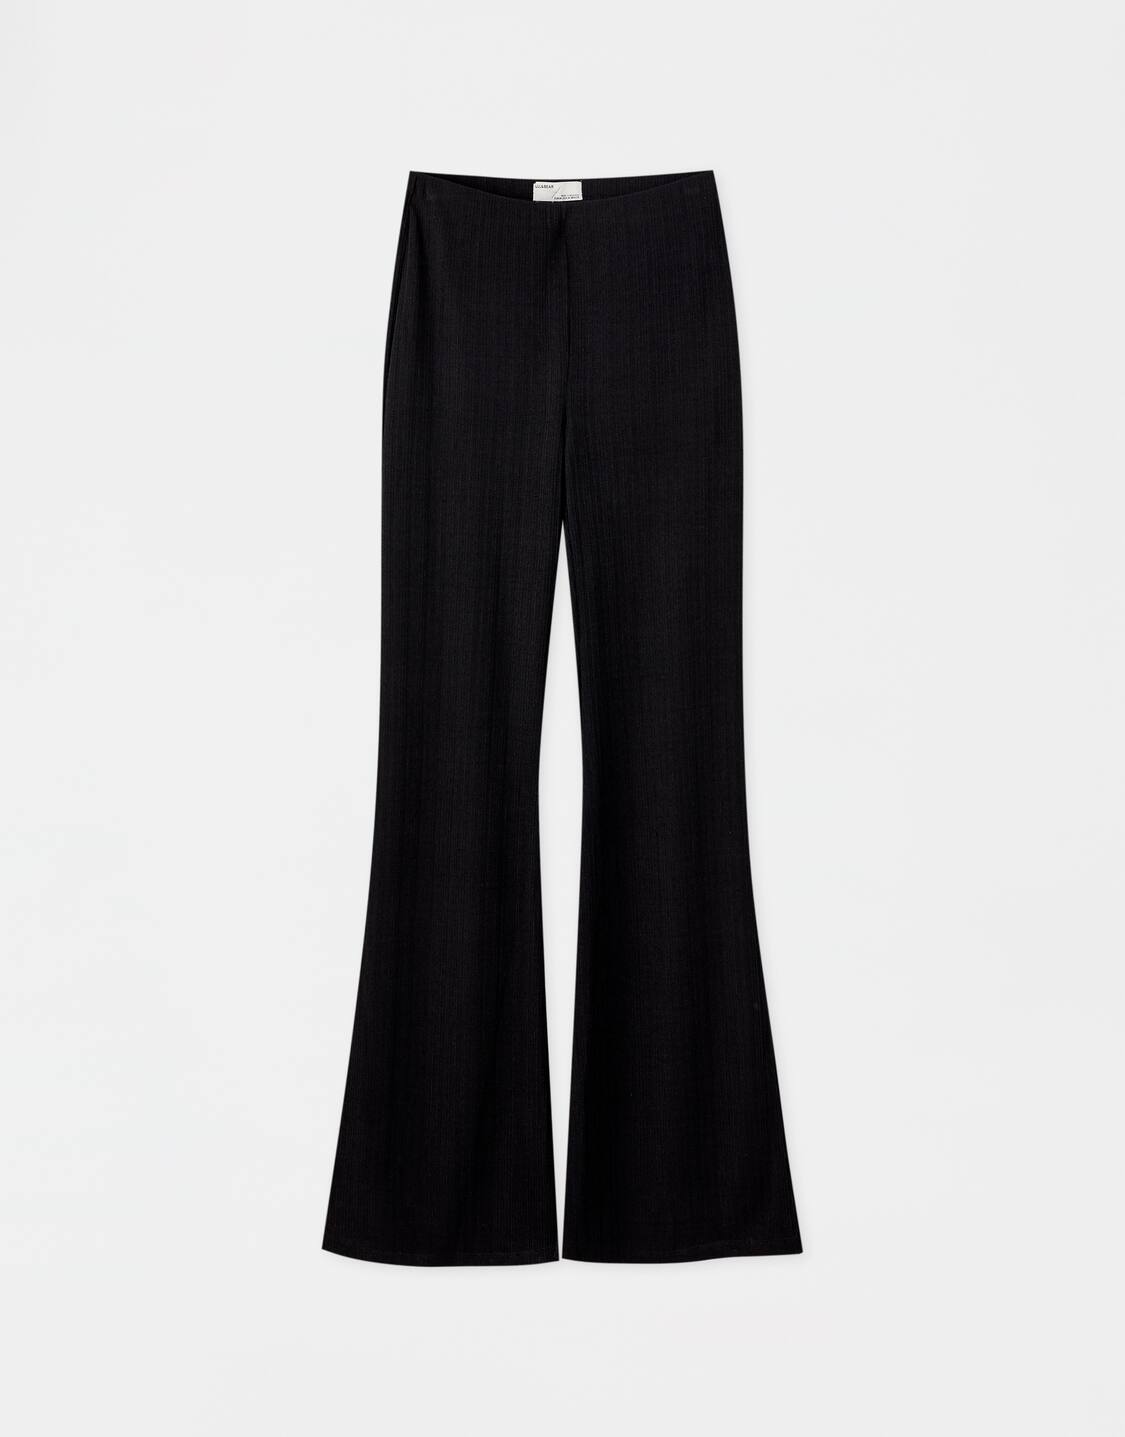 Ribbed Black Flared Trousers Pull Bear